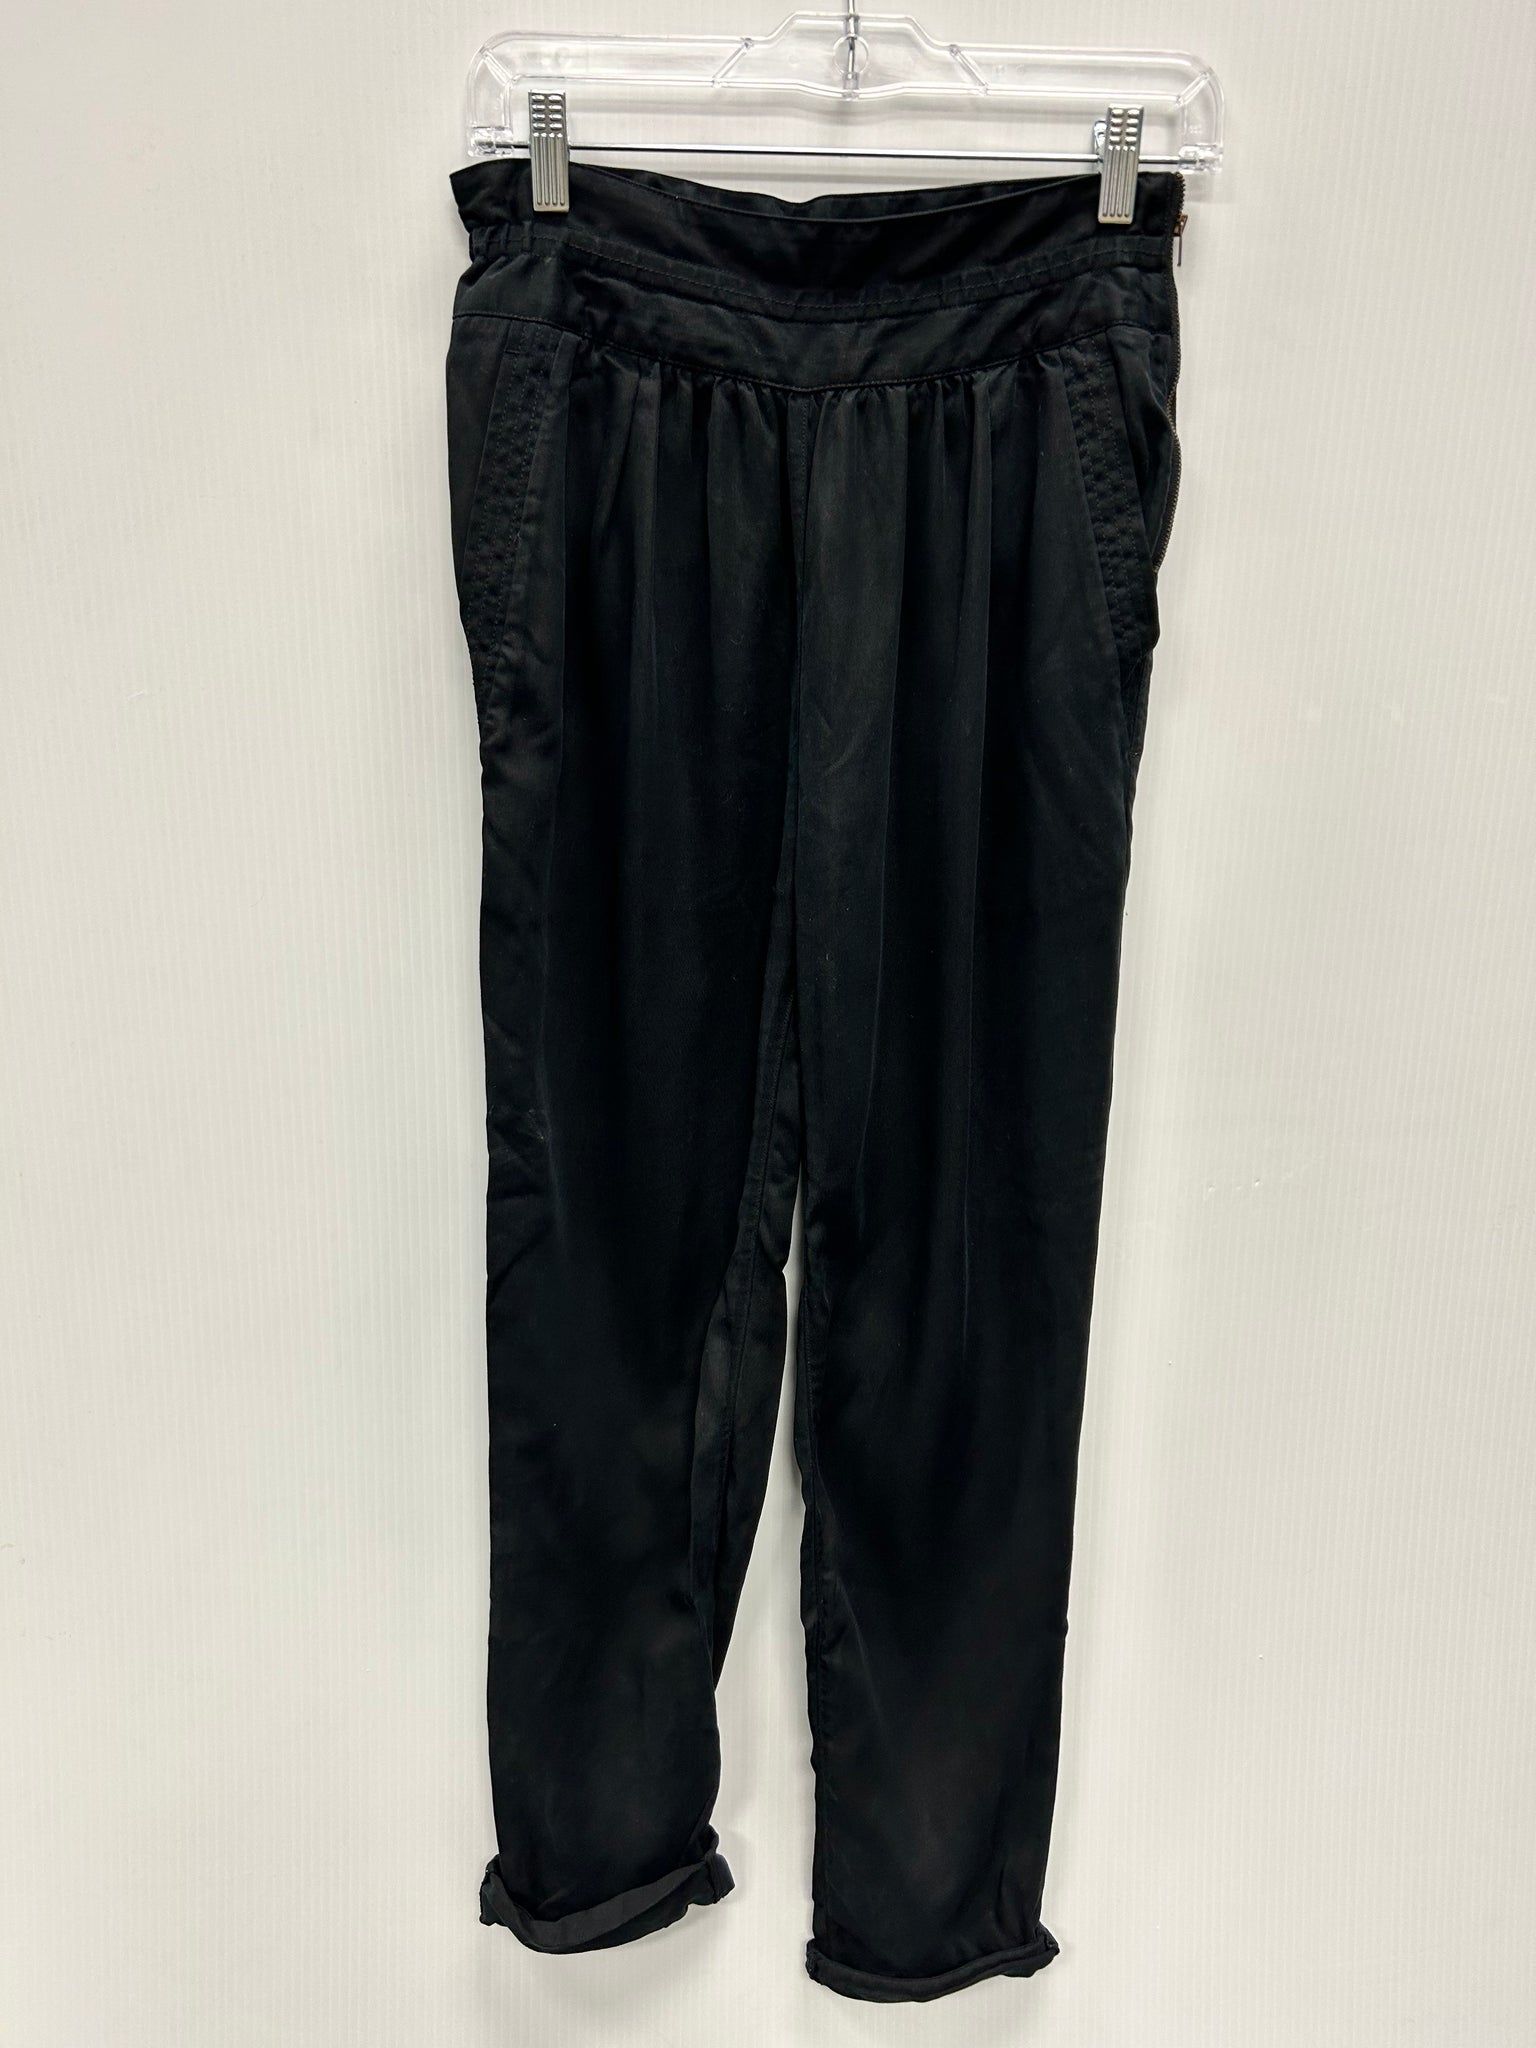 Size 0 Aritzia Wilfred Trousers Item No. 20934